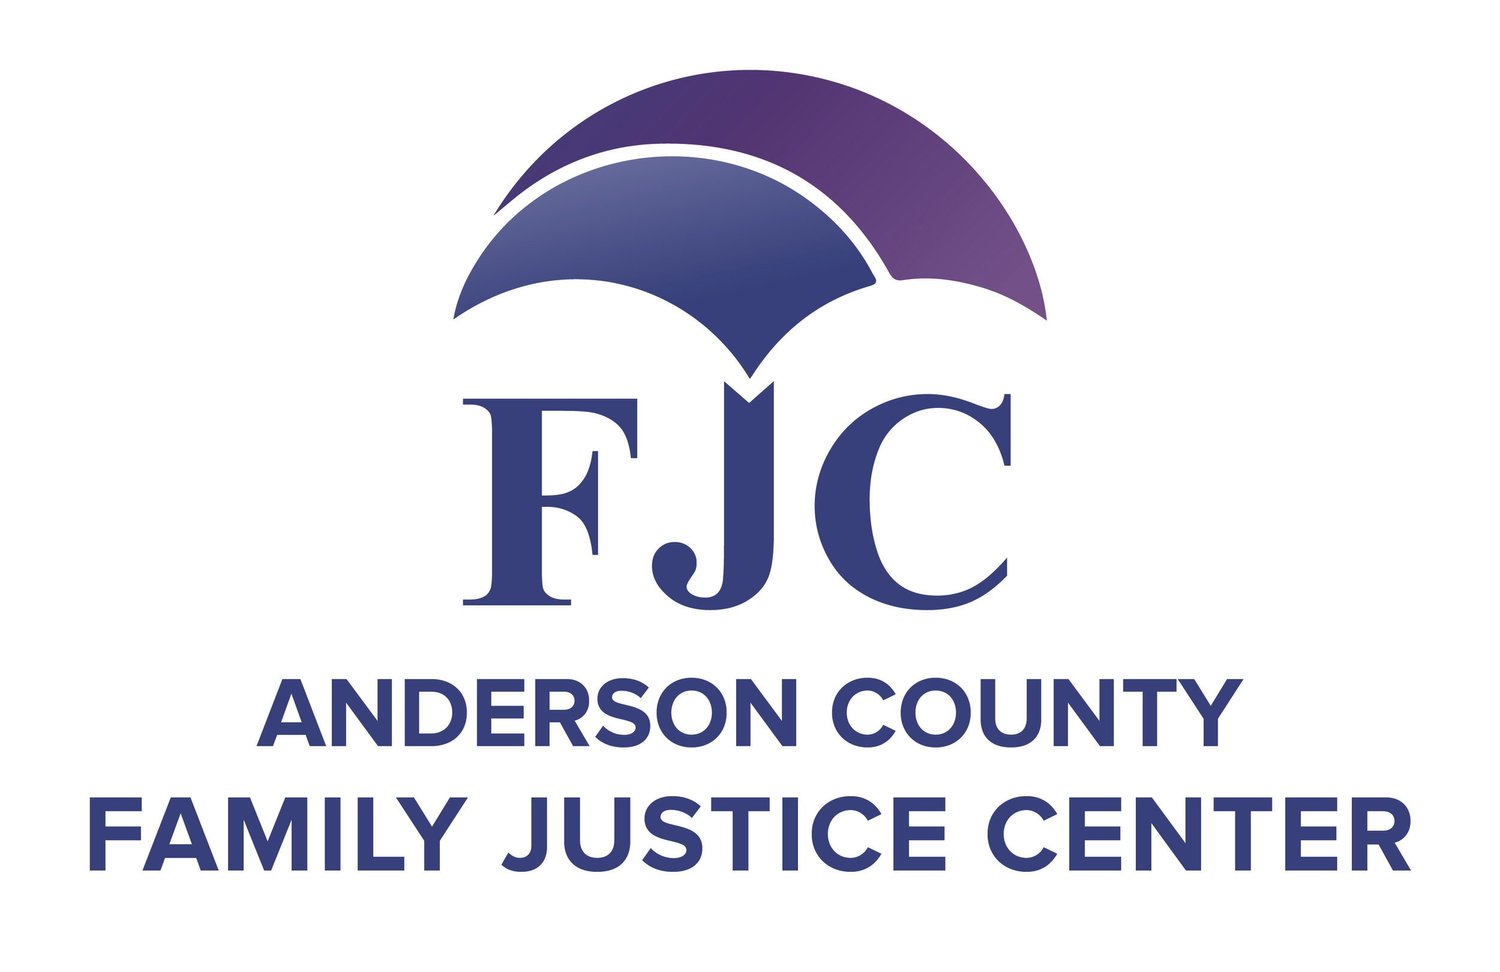 Anderson County Family Justice Center